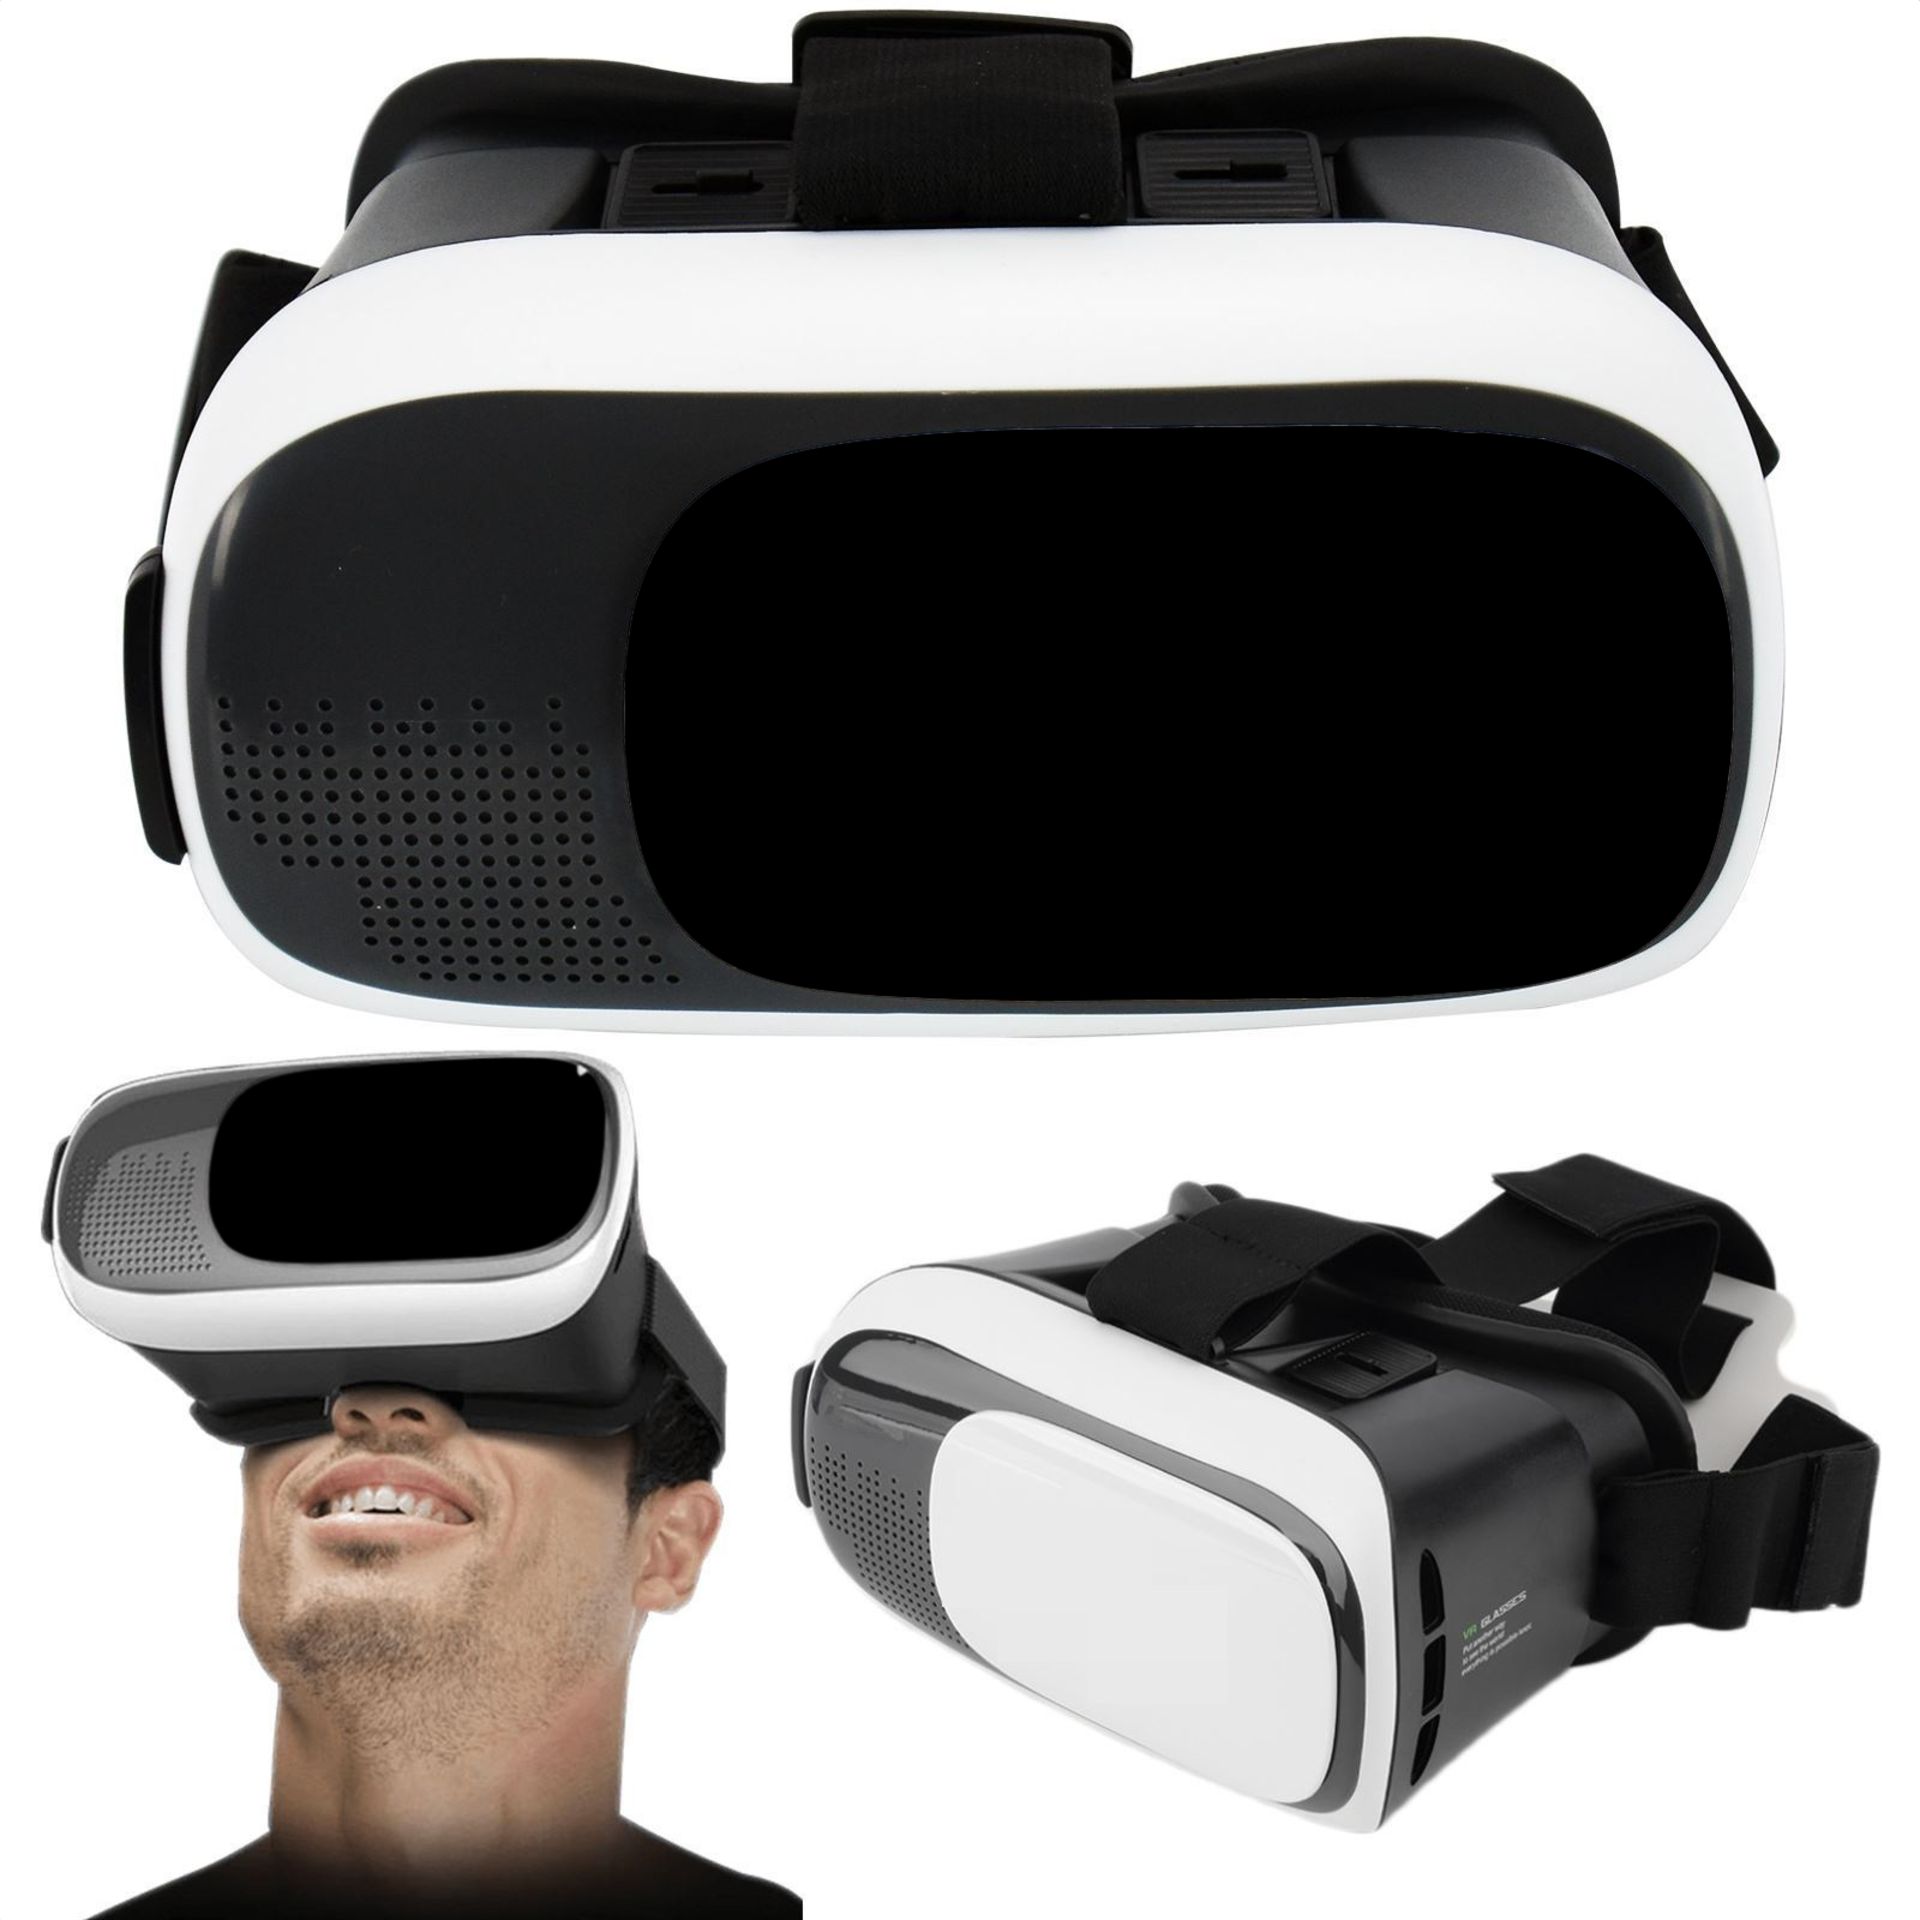 + VAT Brand New VR Virtual Reality Glasses Headset - Padded Section On Goggles - Sliding Viewing